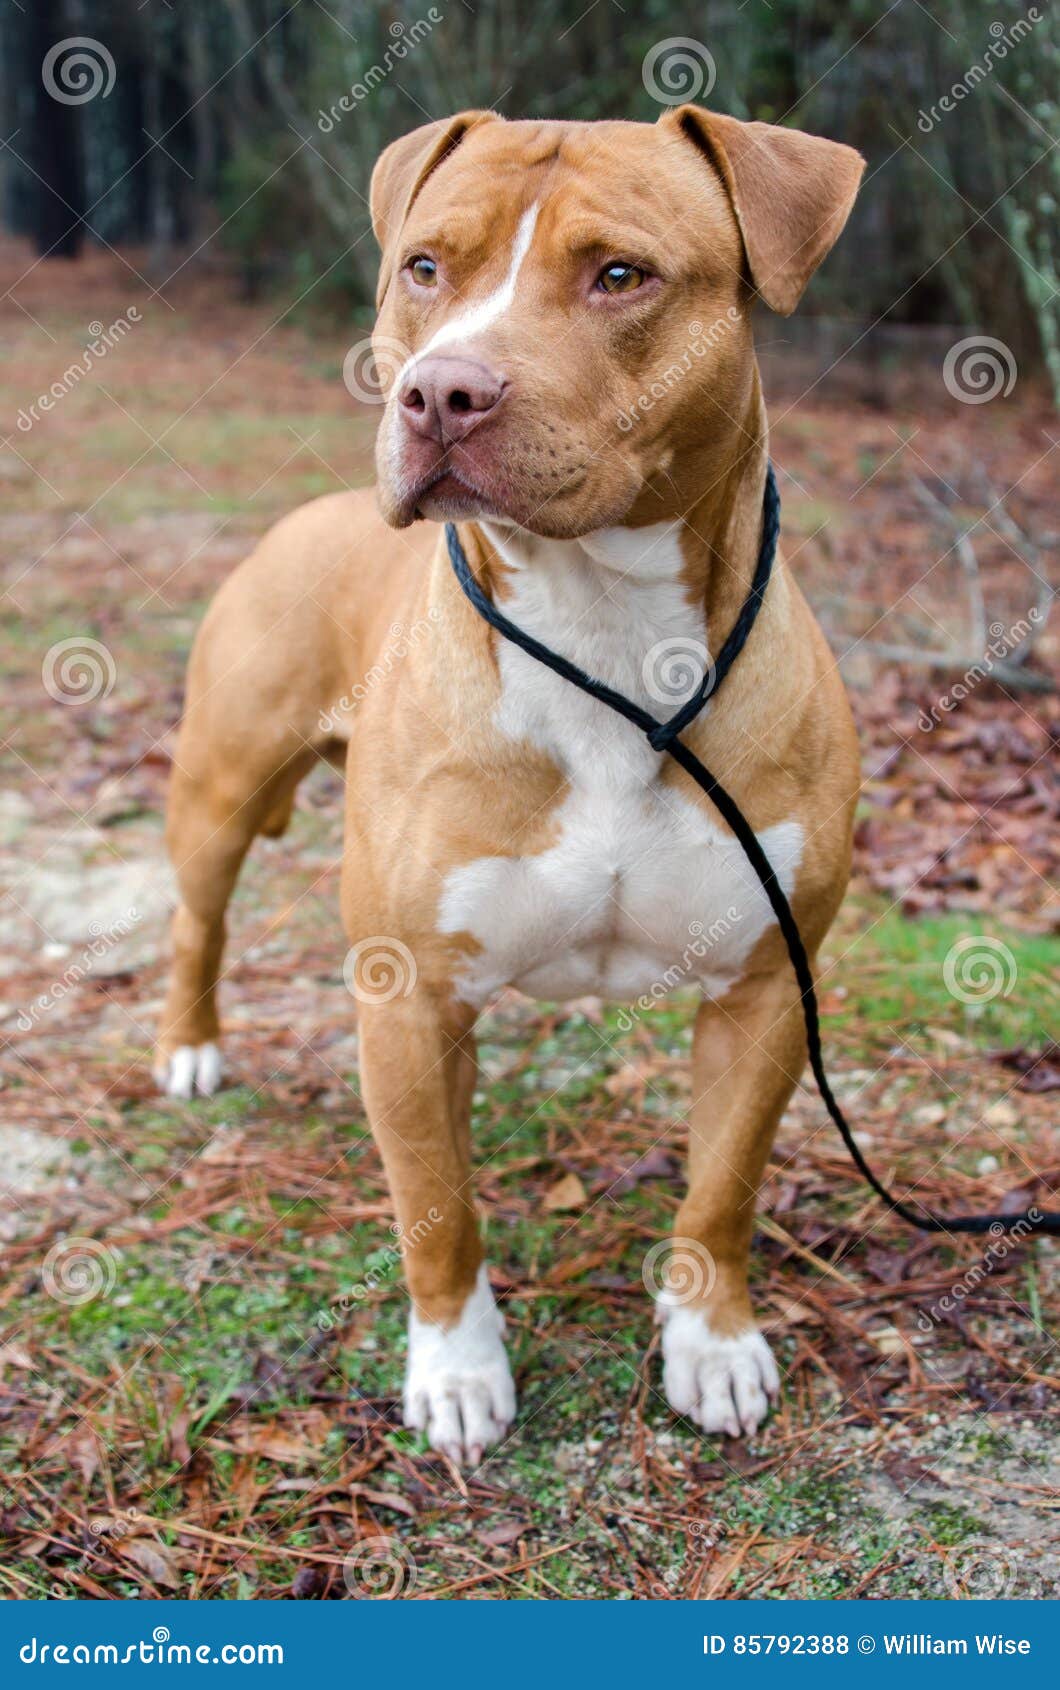 Is a staffordshire bull terrier a pitbull